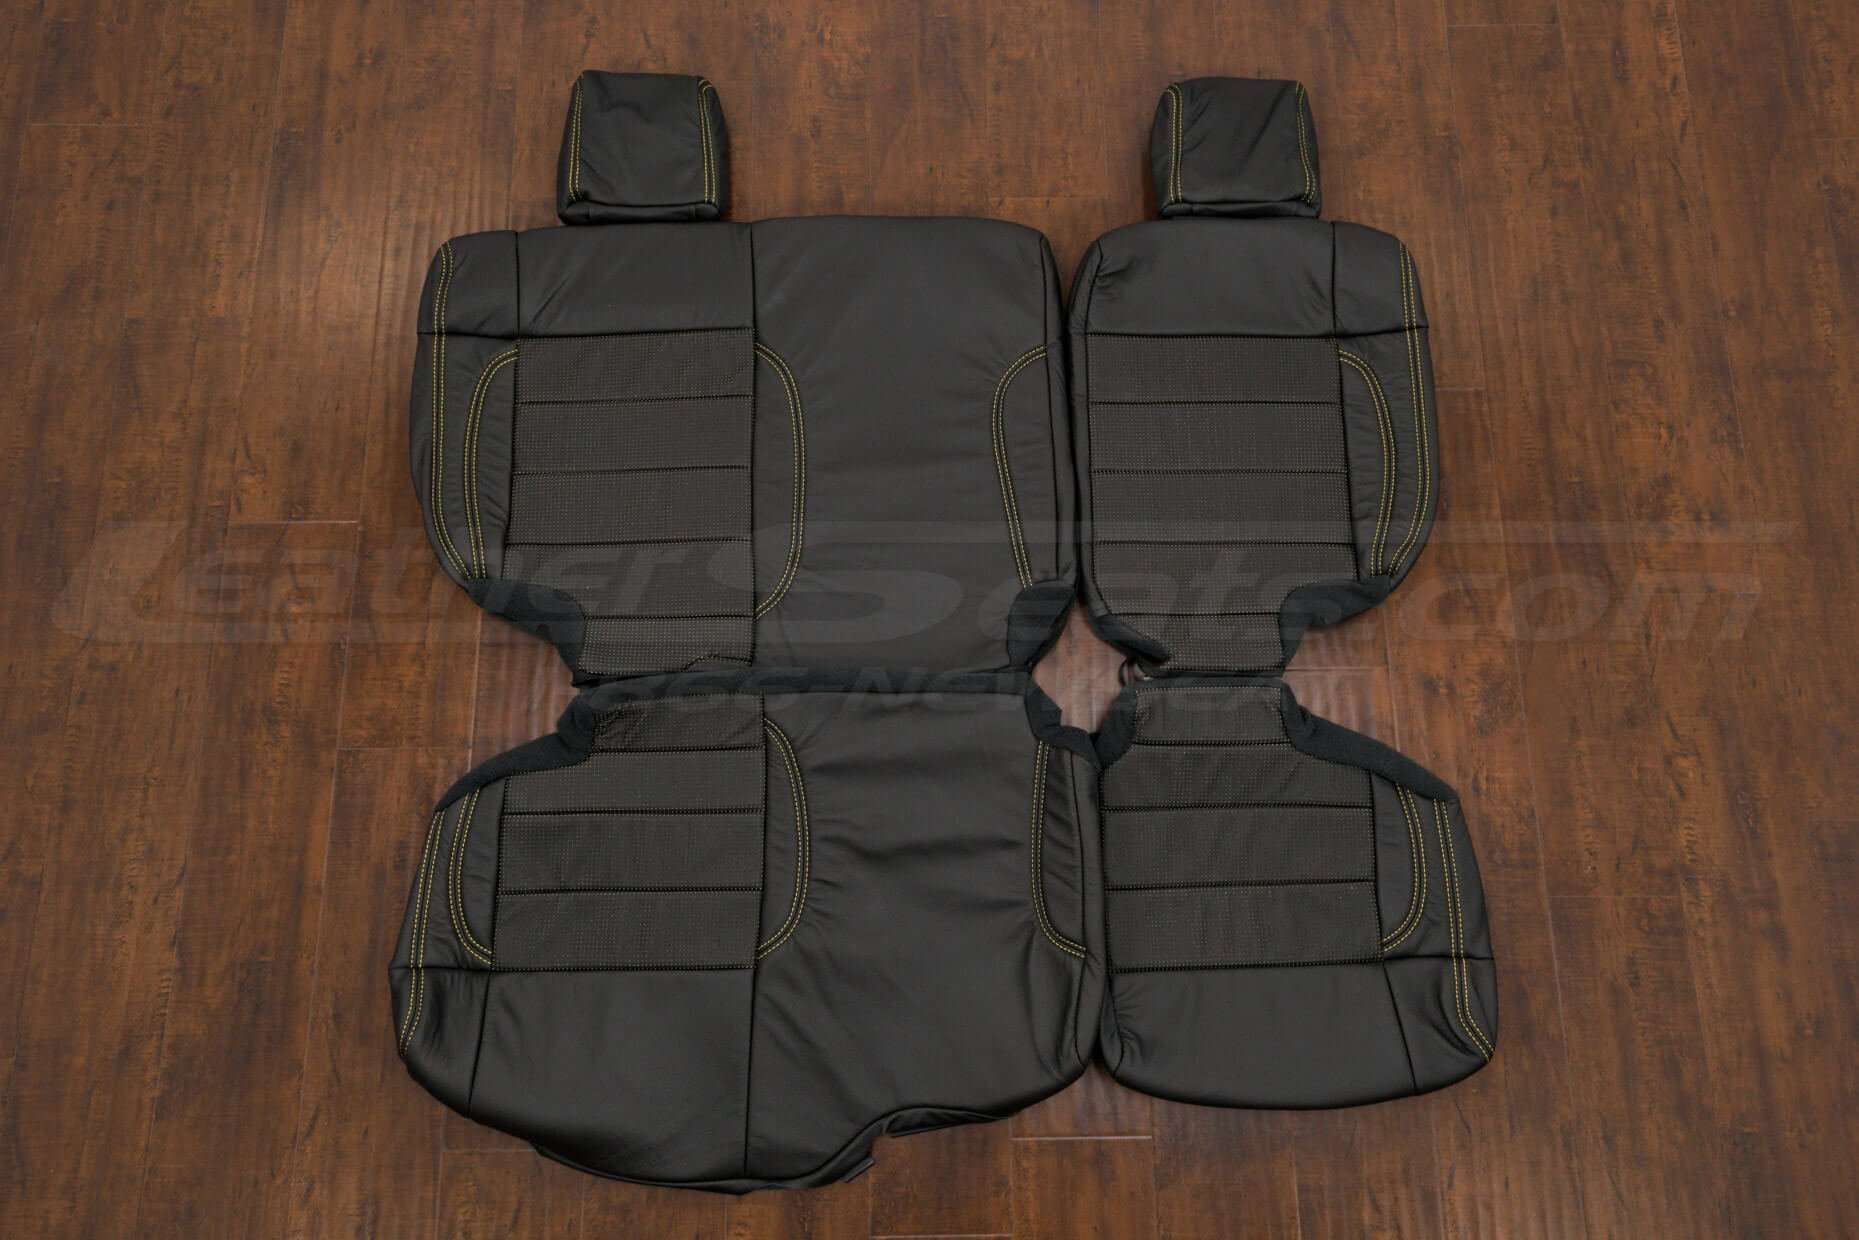 Jeep Wrangler JK Leather Seat Kit - Black & Piazza Yellow - Rear seat upholstery